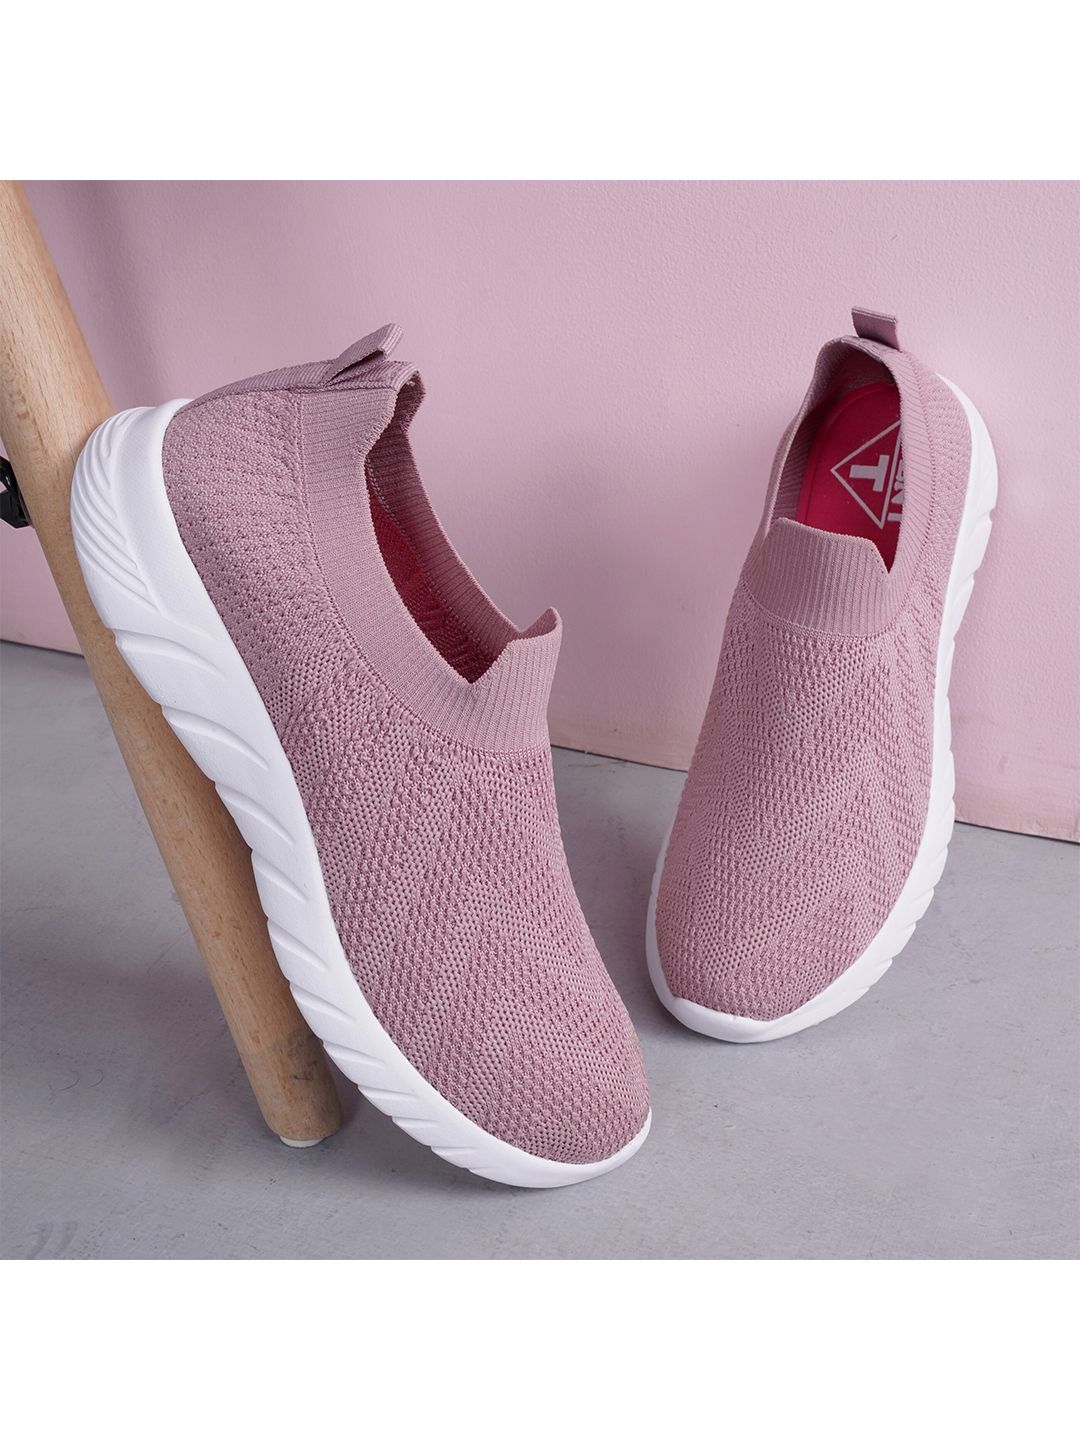 TPENT Women Rose Gold Mesh Running Non-Marking Shoes Price in India